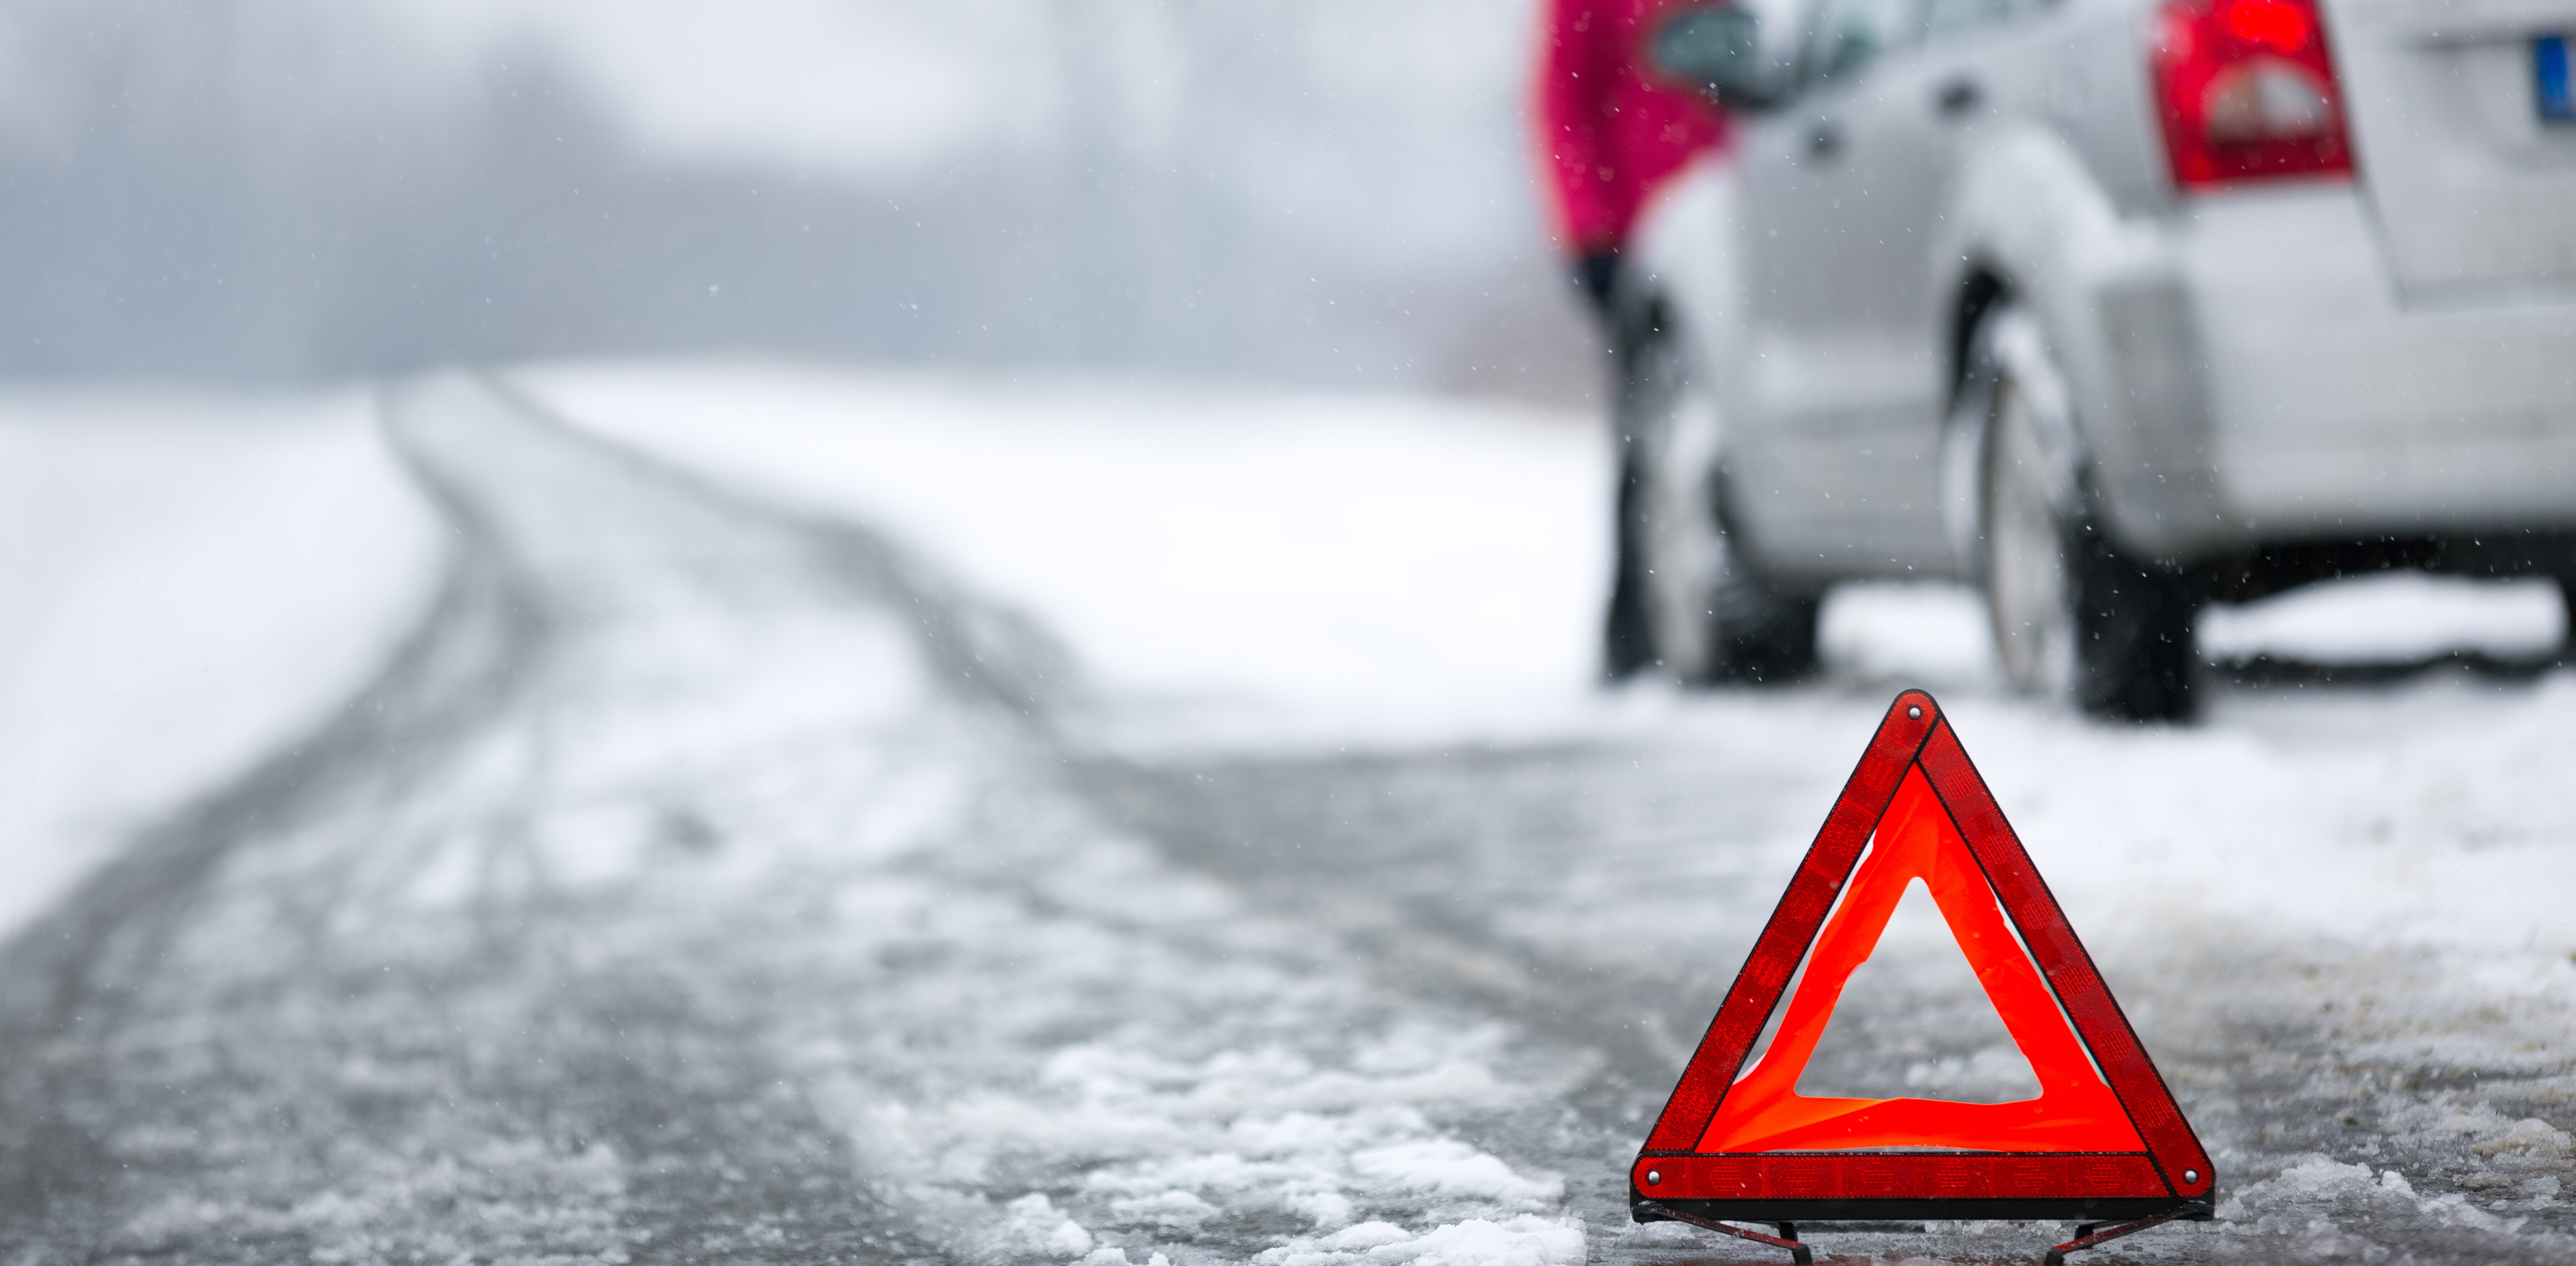 Winter car maintenance: 10 tips to prepare for the cold weather - Ageas